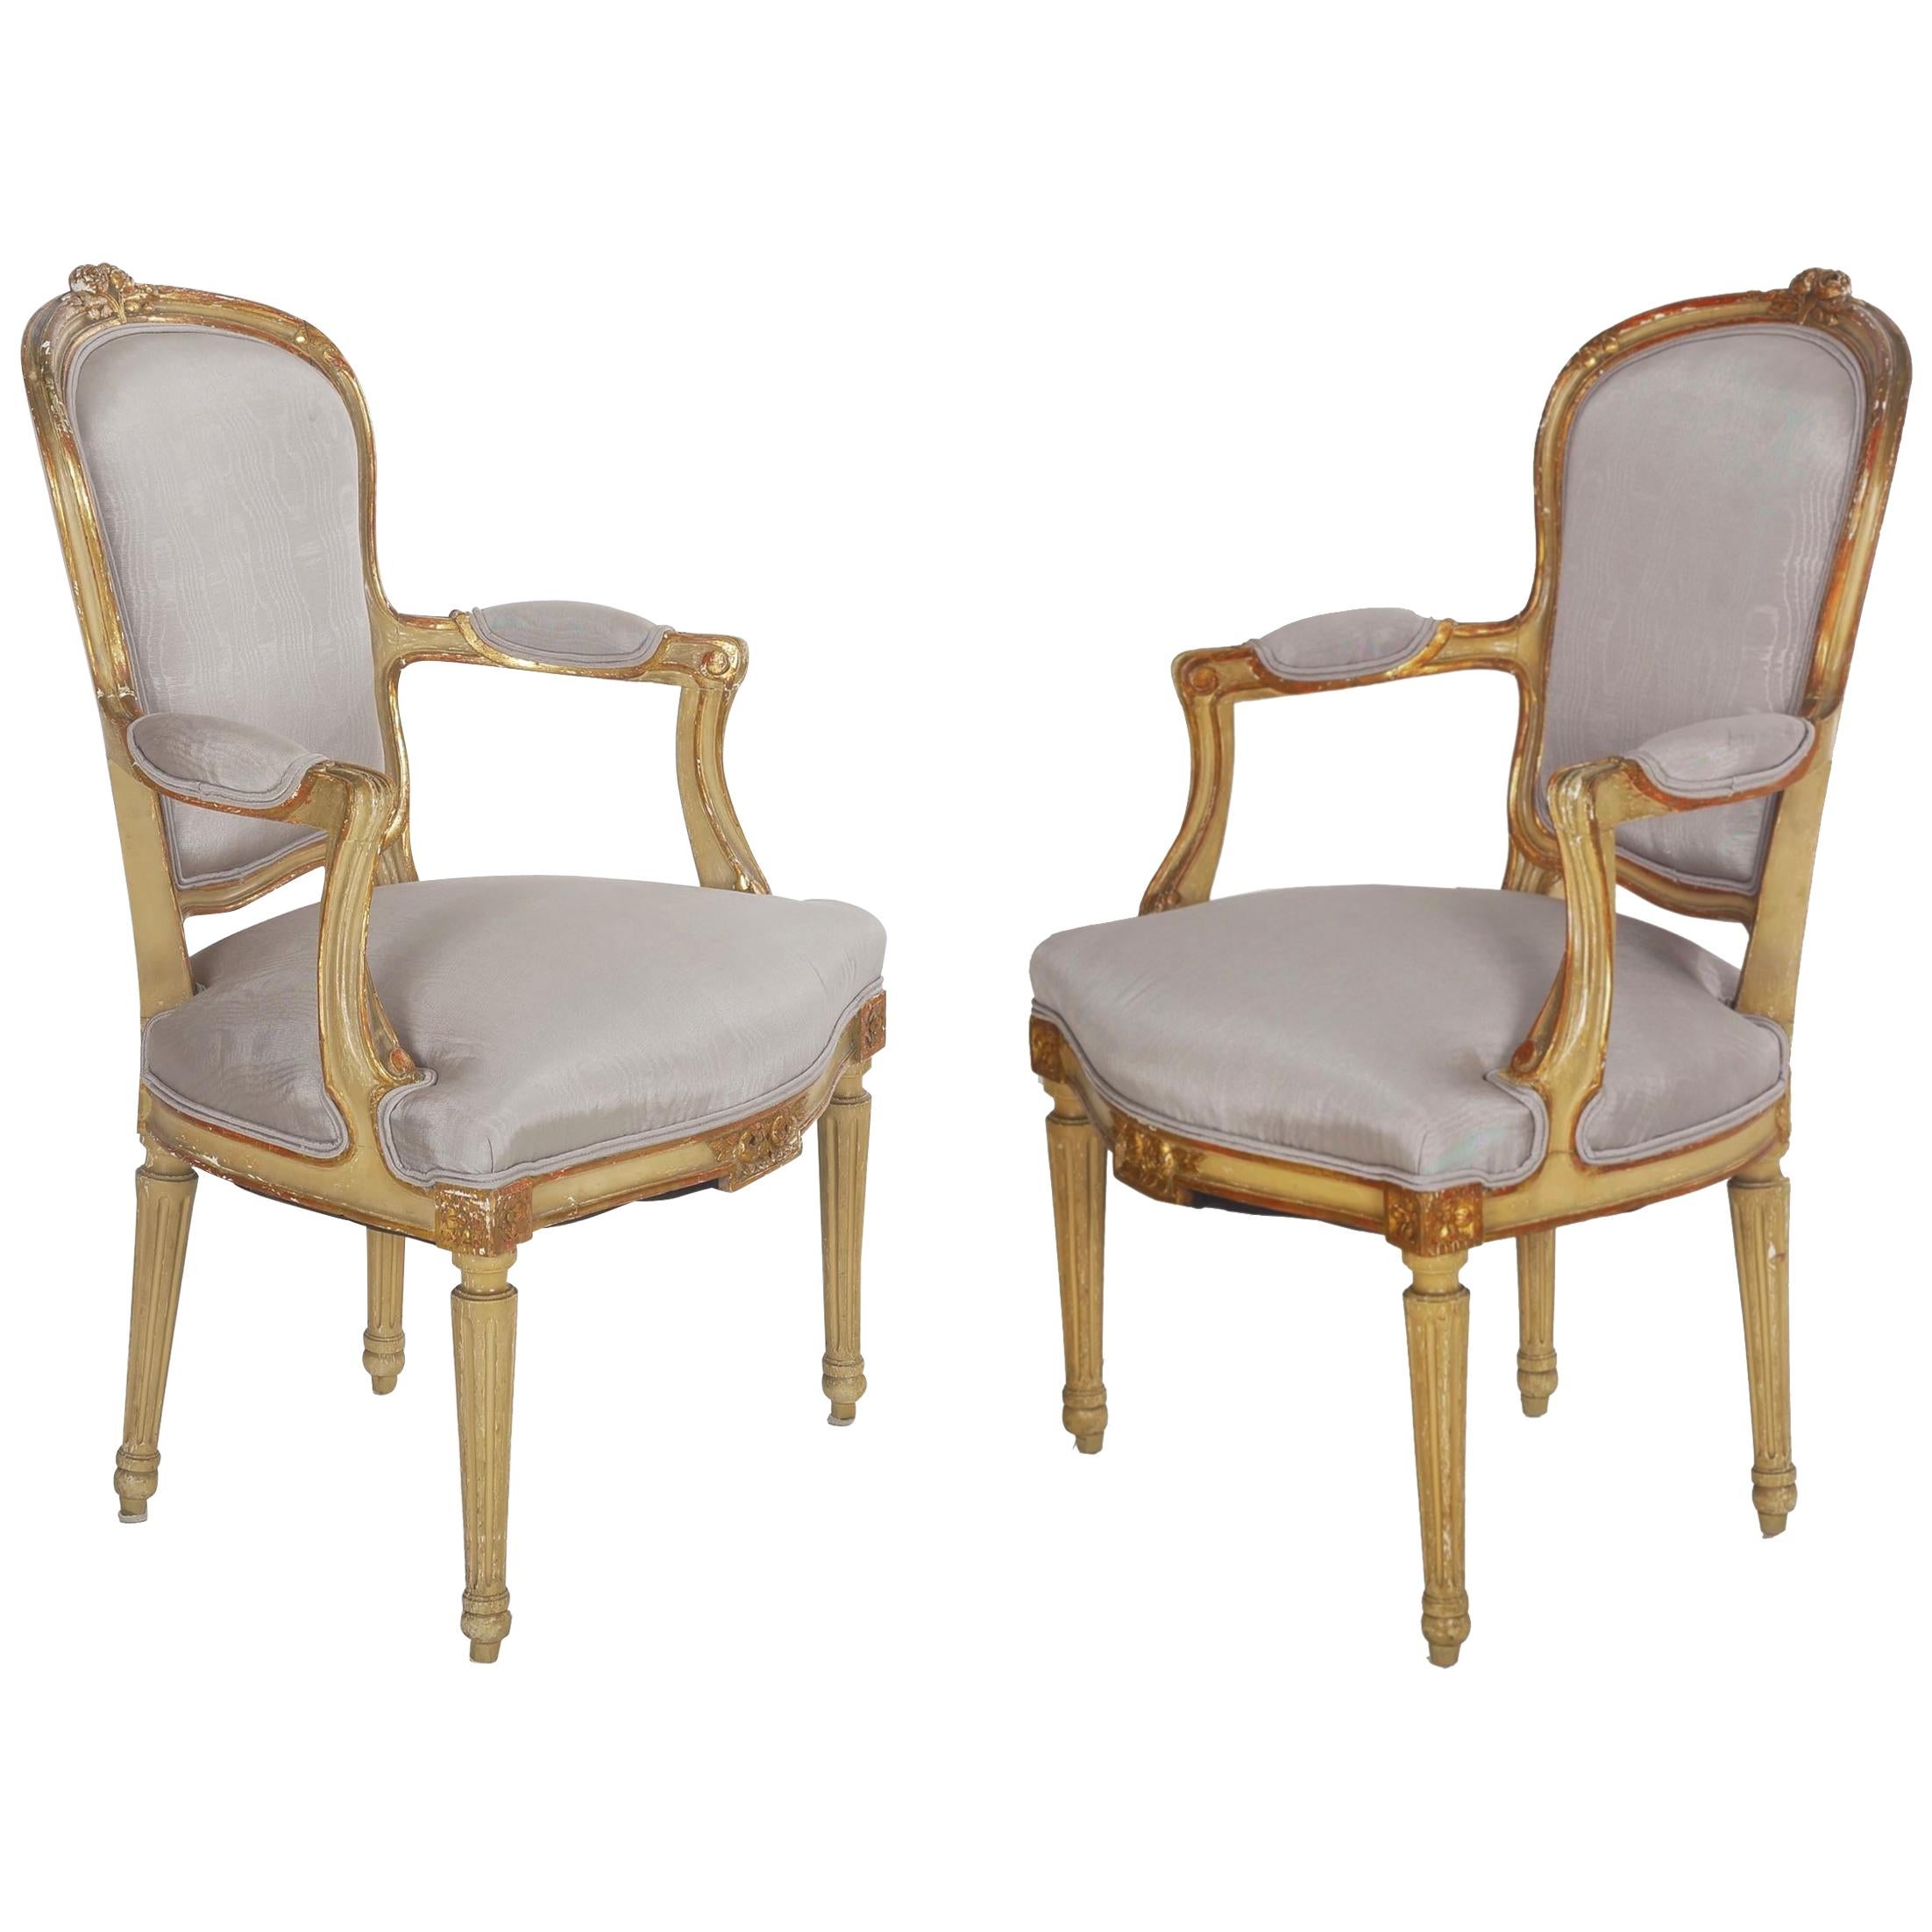 Pair of French Antique Painted Louis XVI Style Armchairs Fauteuils, 19th Century